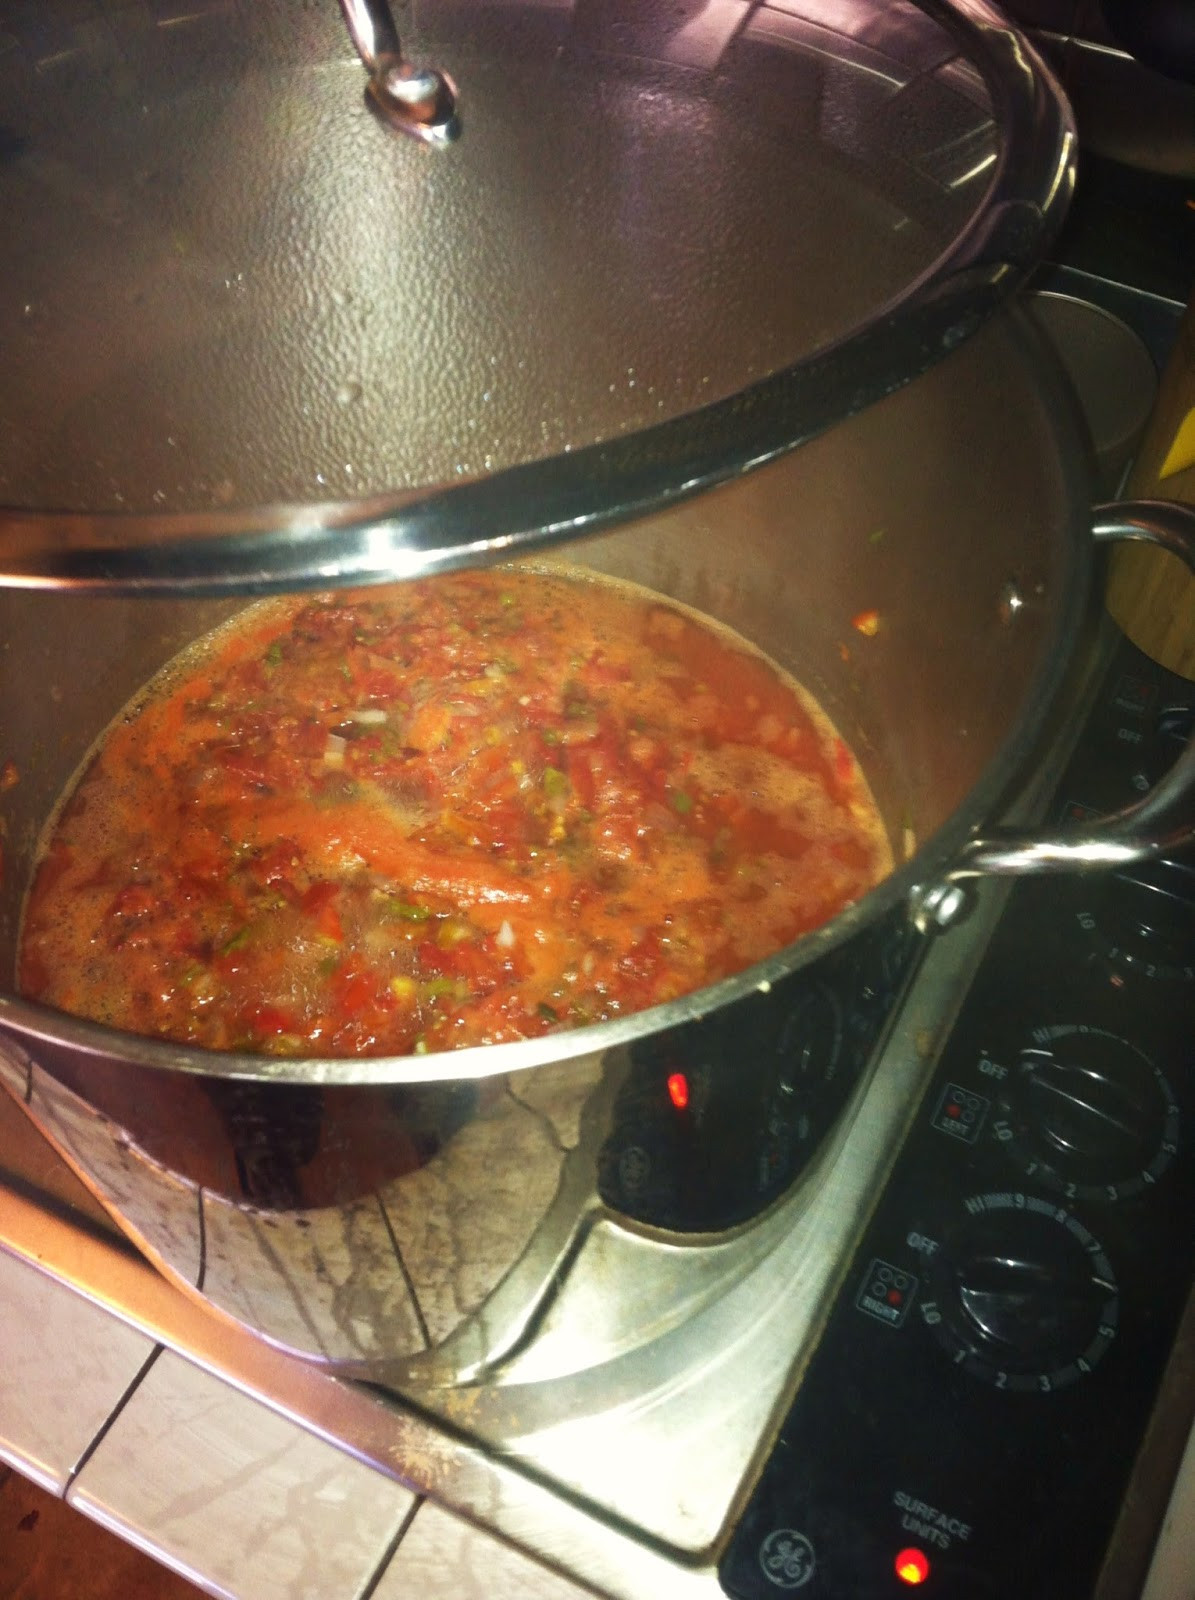 Spicy Salsa Recipe For Canning
 Chelsea Welsea mits New SPICY Salsa Recipe For Canning